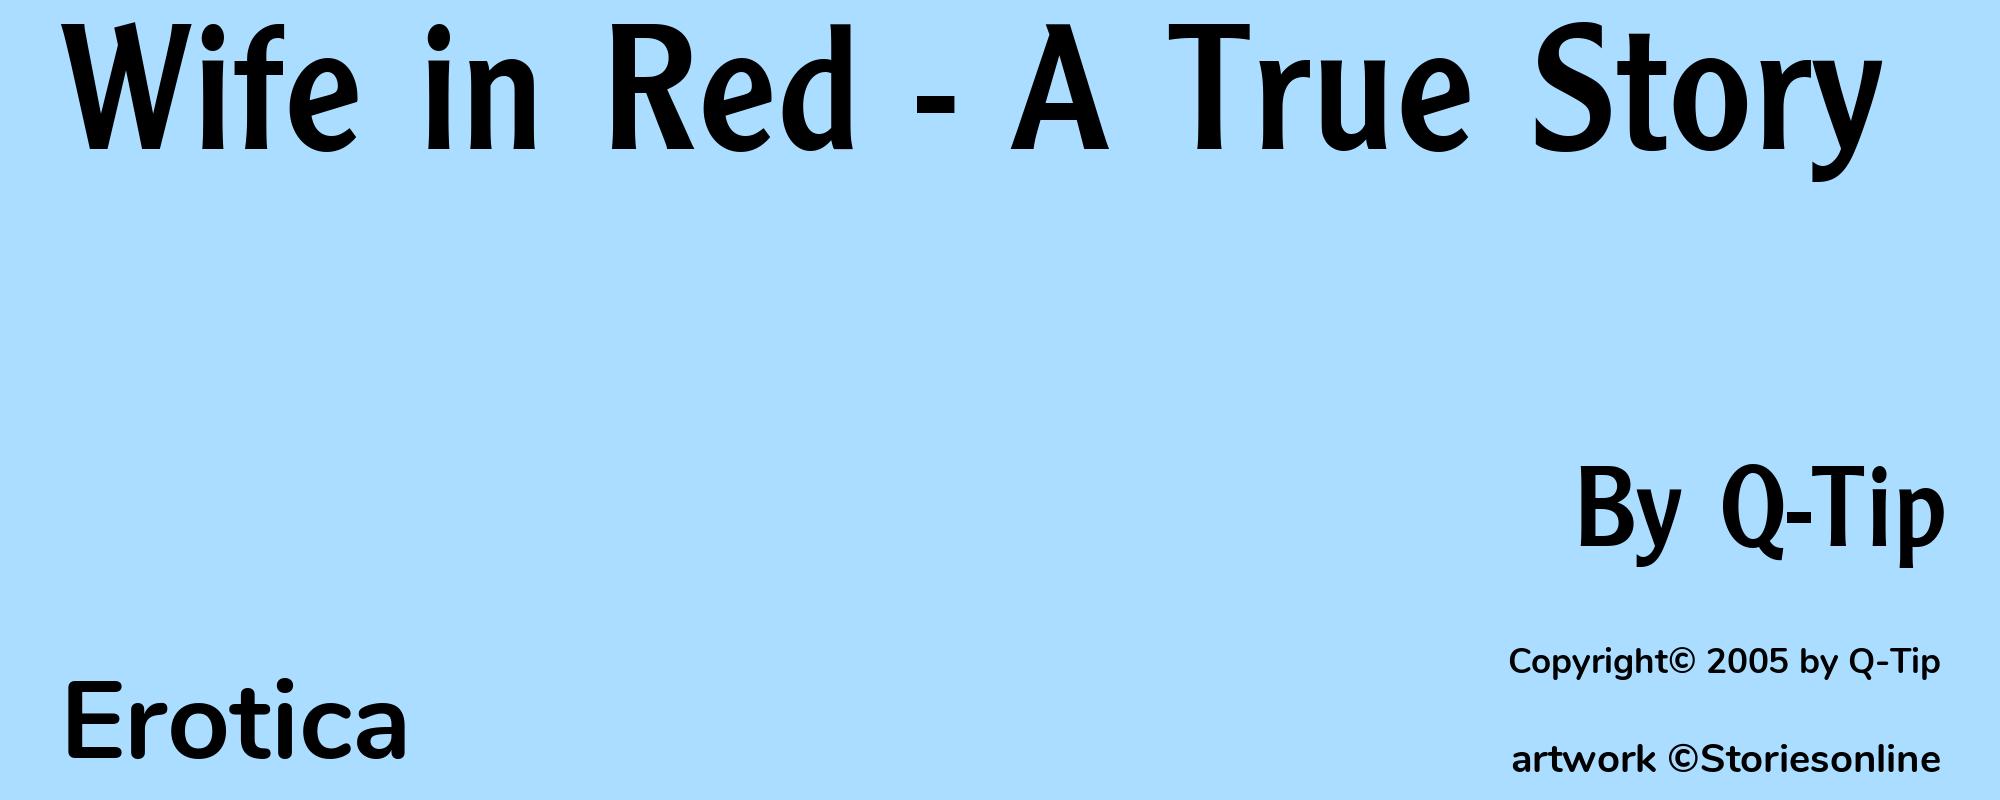 Wife in Red - A True Story - Cover